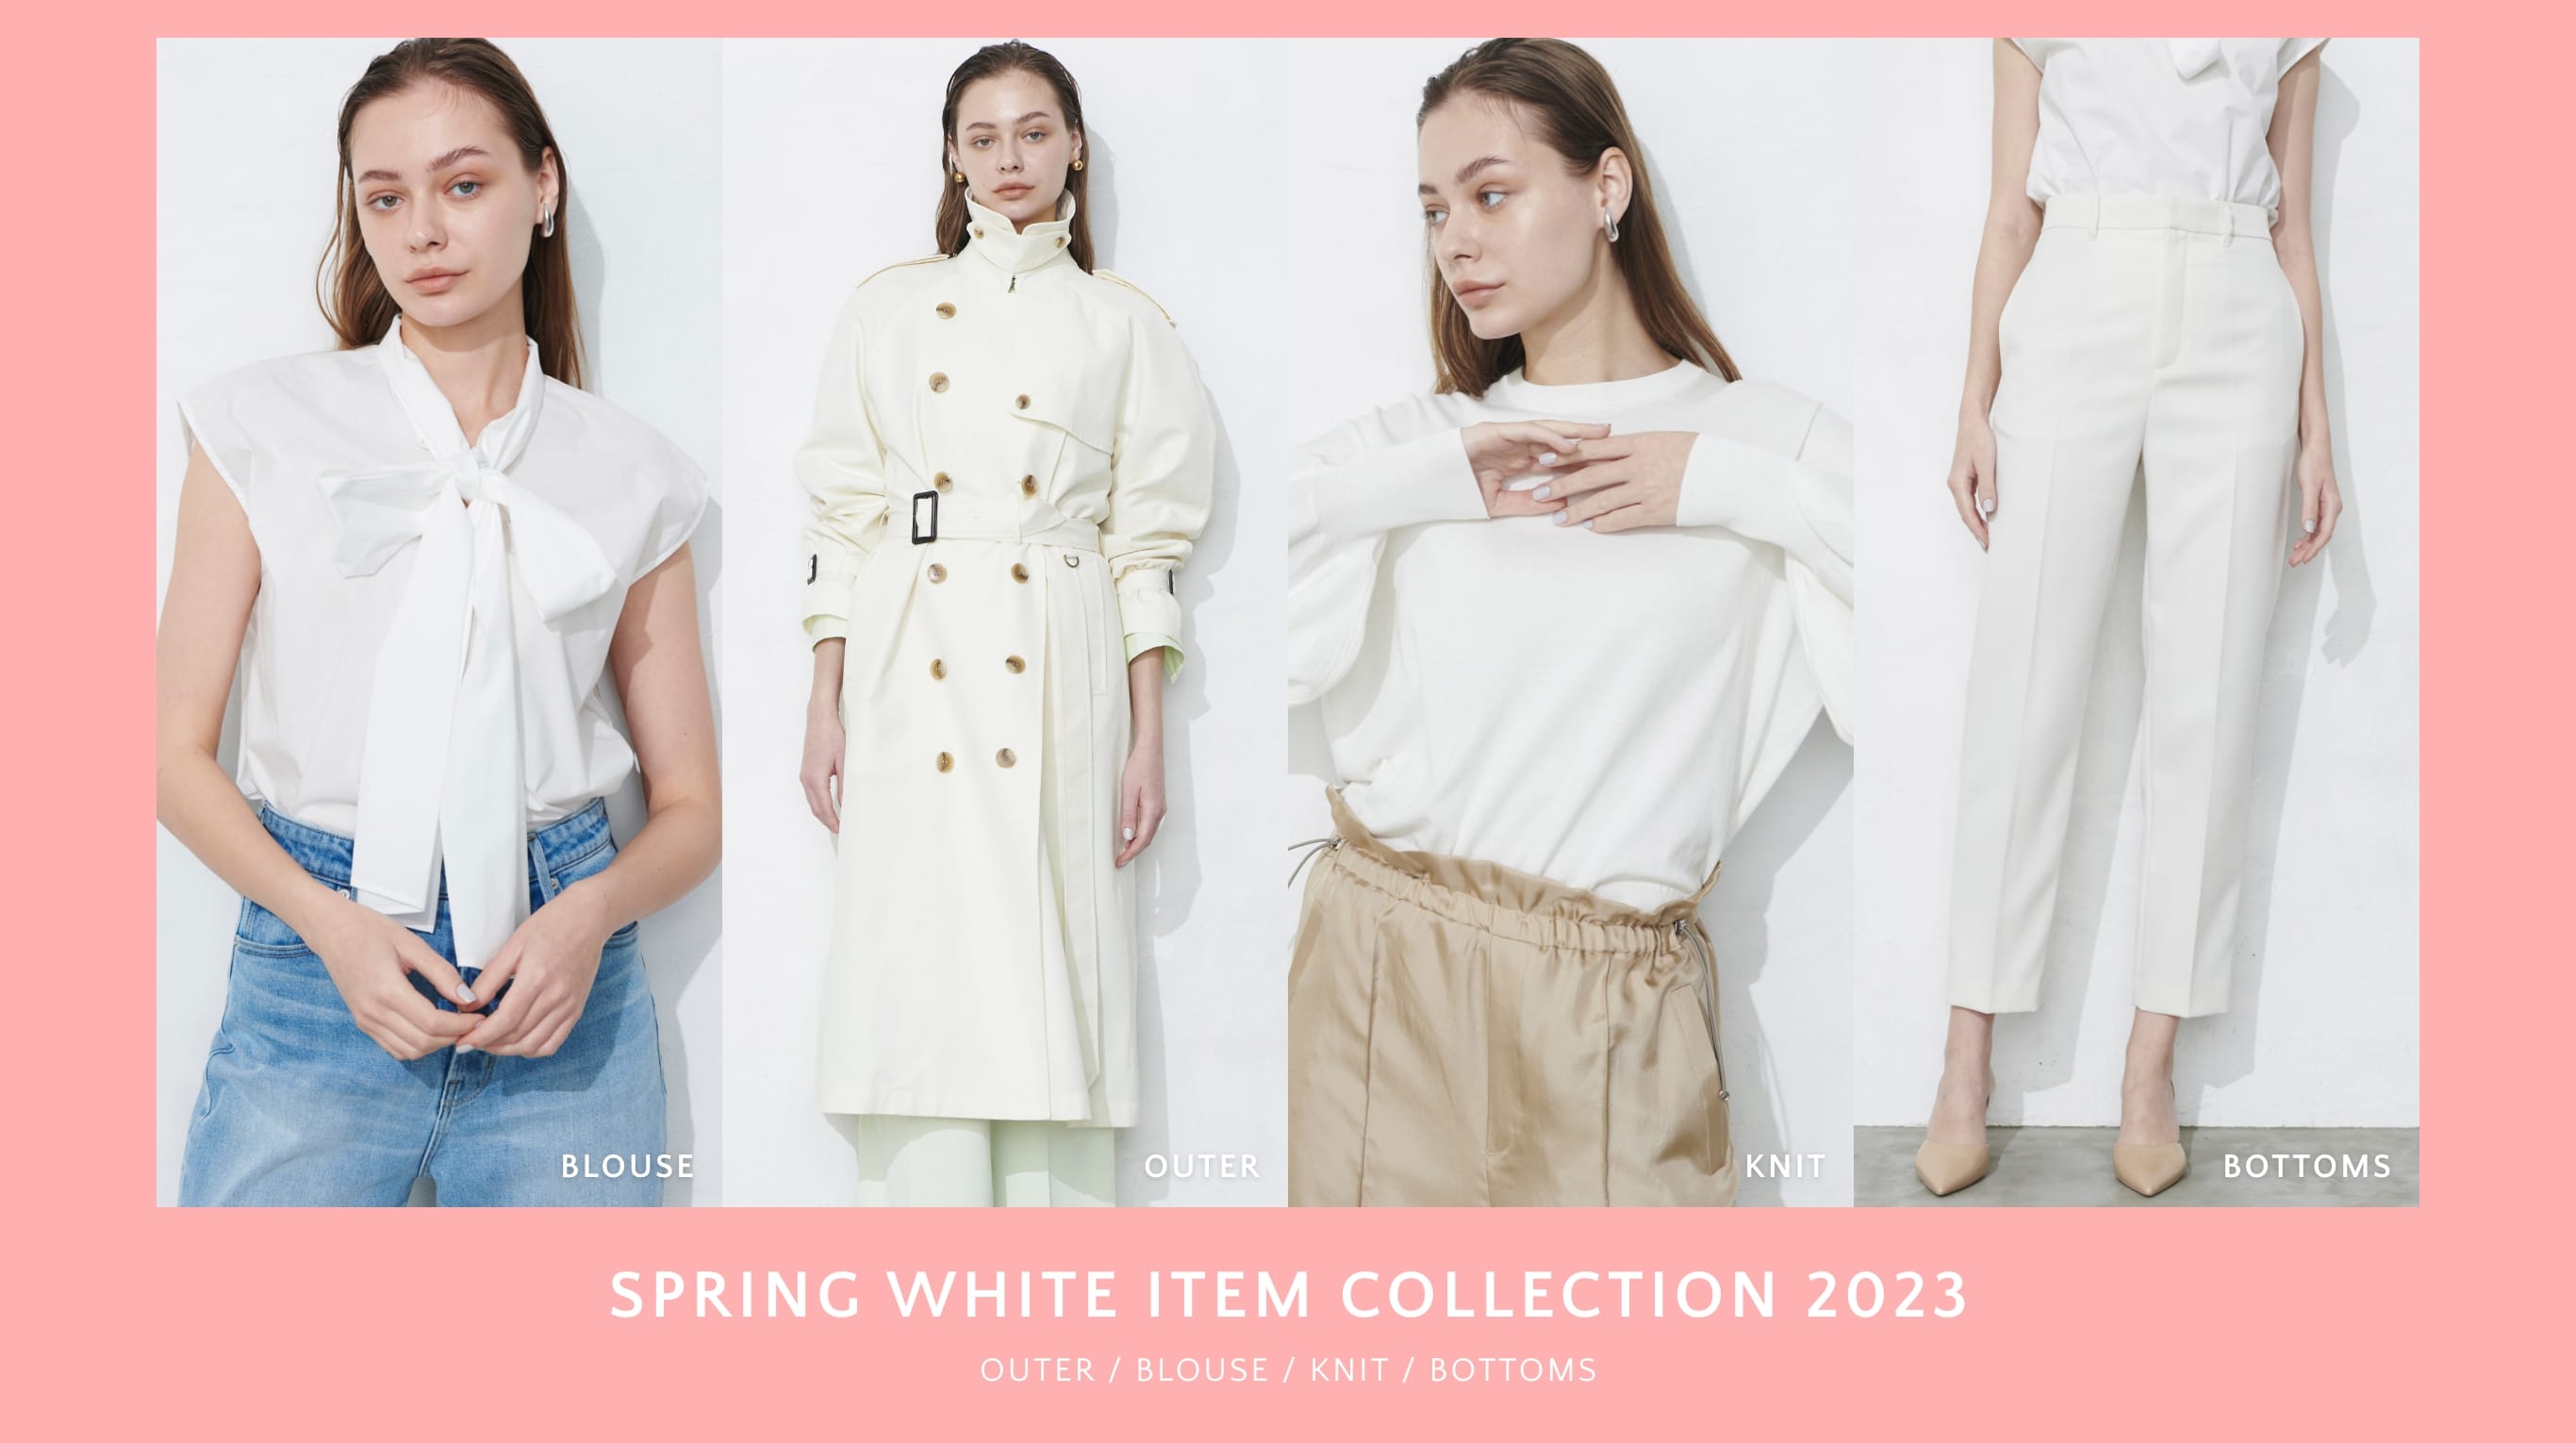 SPRING WHITE ITEM COLLECTION 2023 OUTER / BLOUSE / KNIT / BOTTOMS